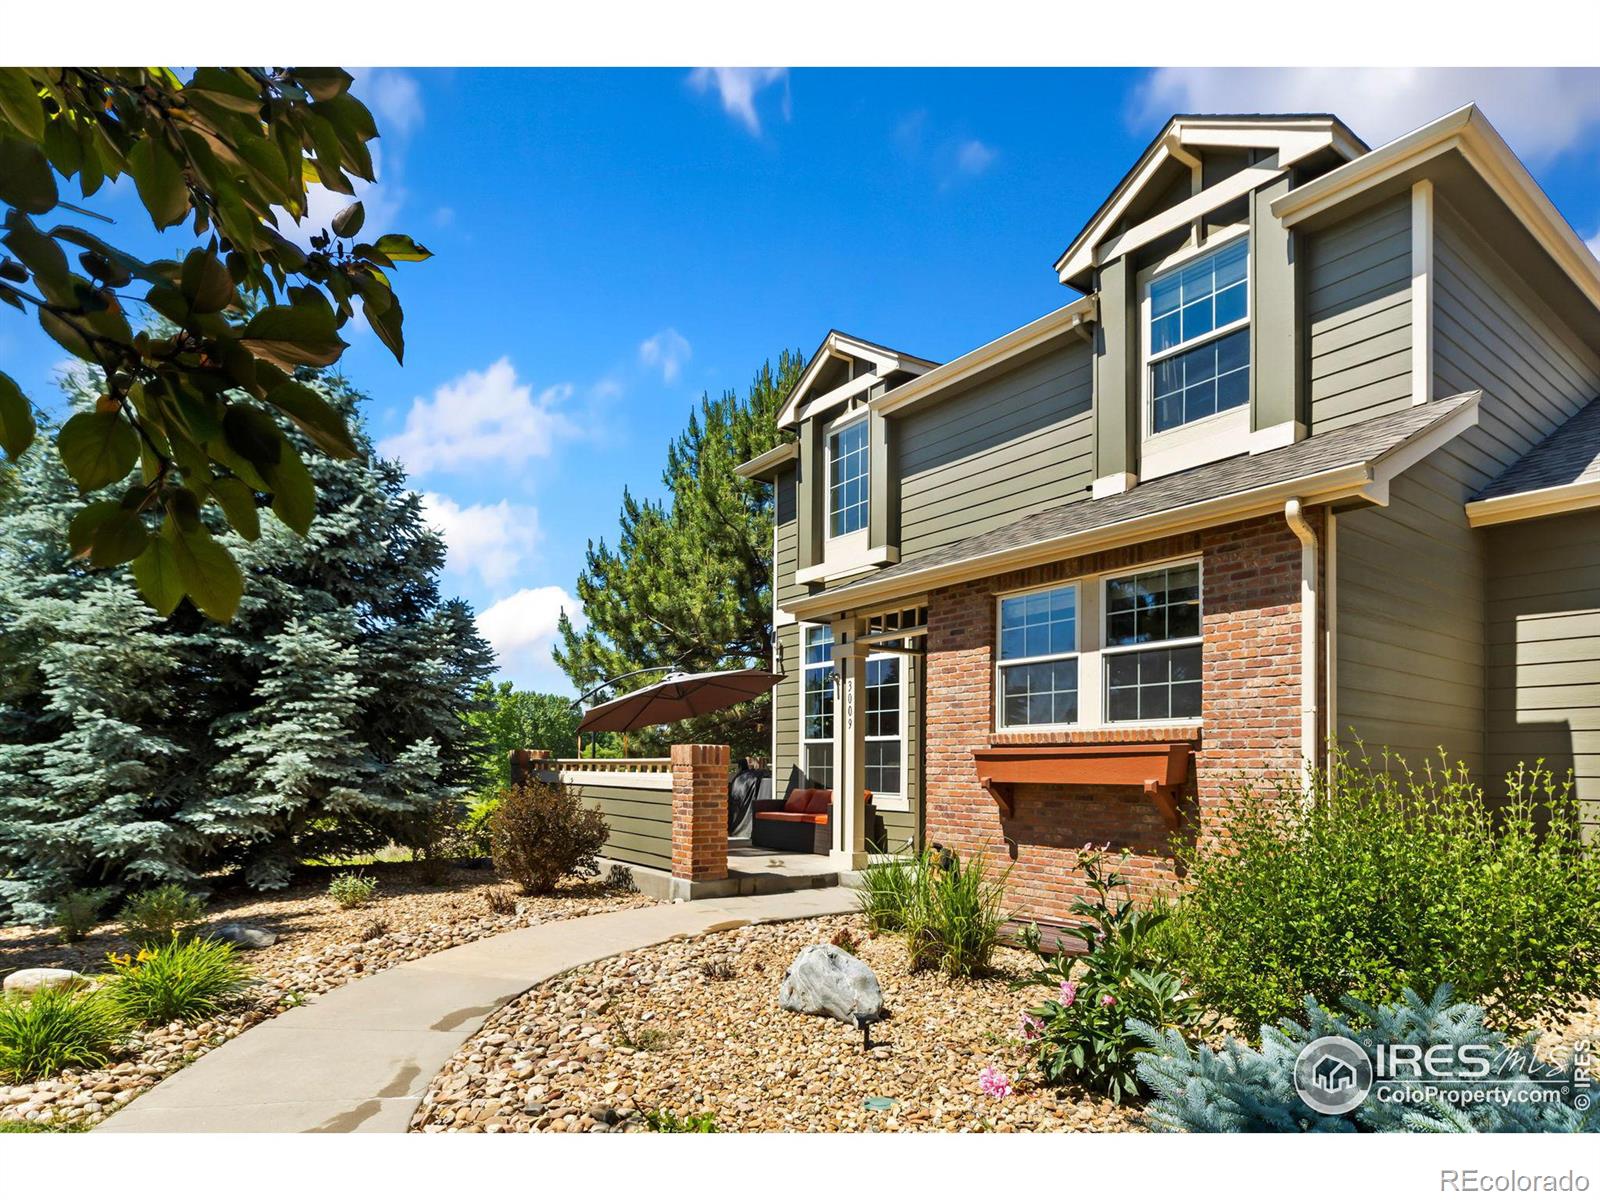 Report Image for 3009  County Fair Lane,Fort Collins, Colorado